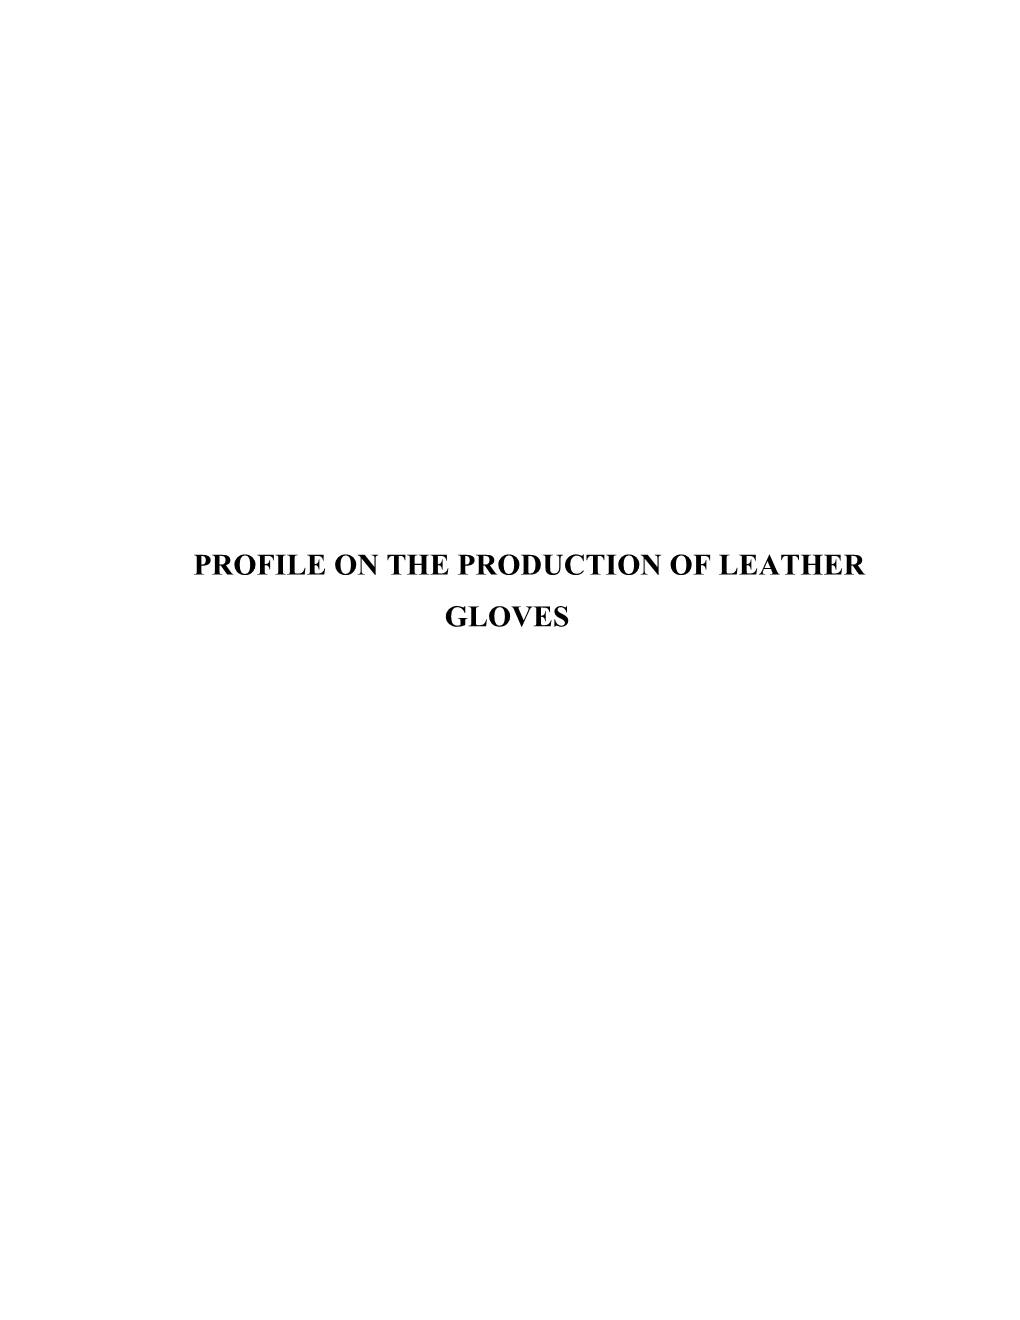 Profile on the Production of Leather Gloves